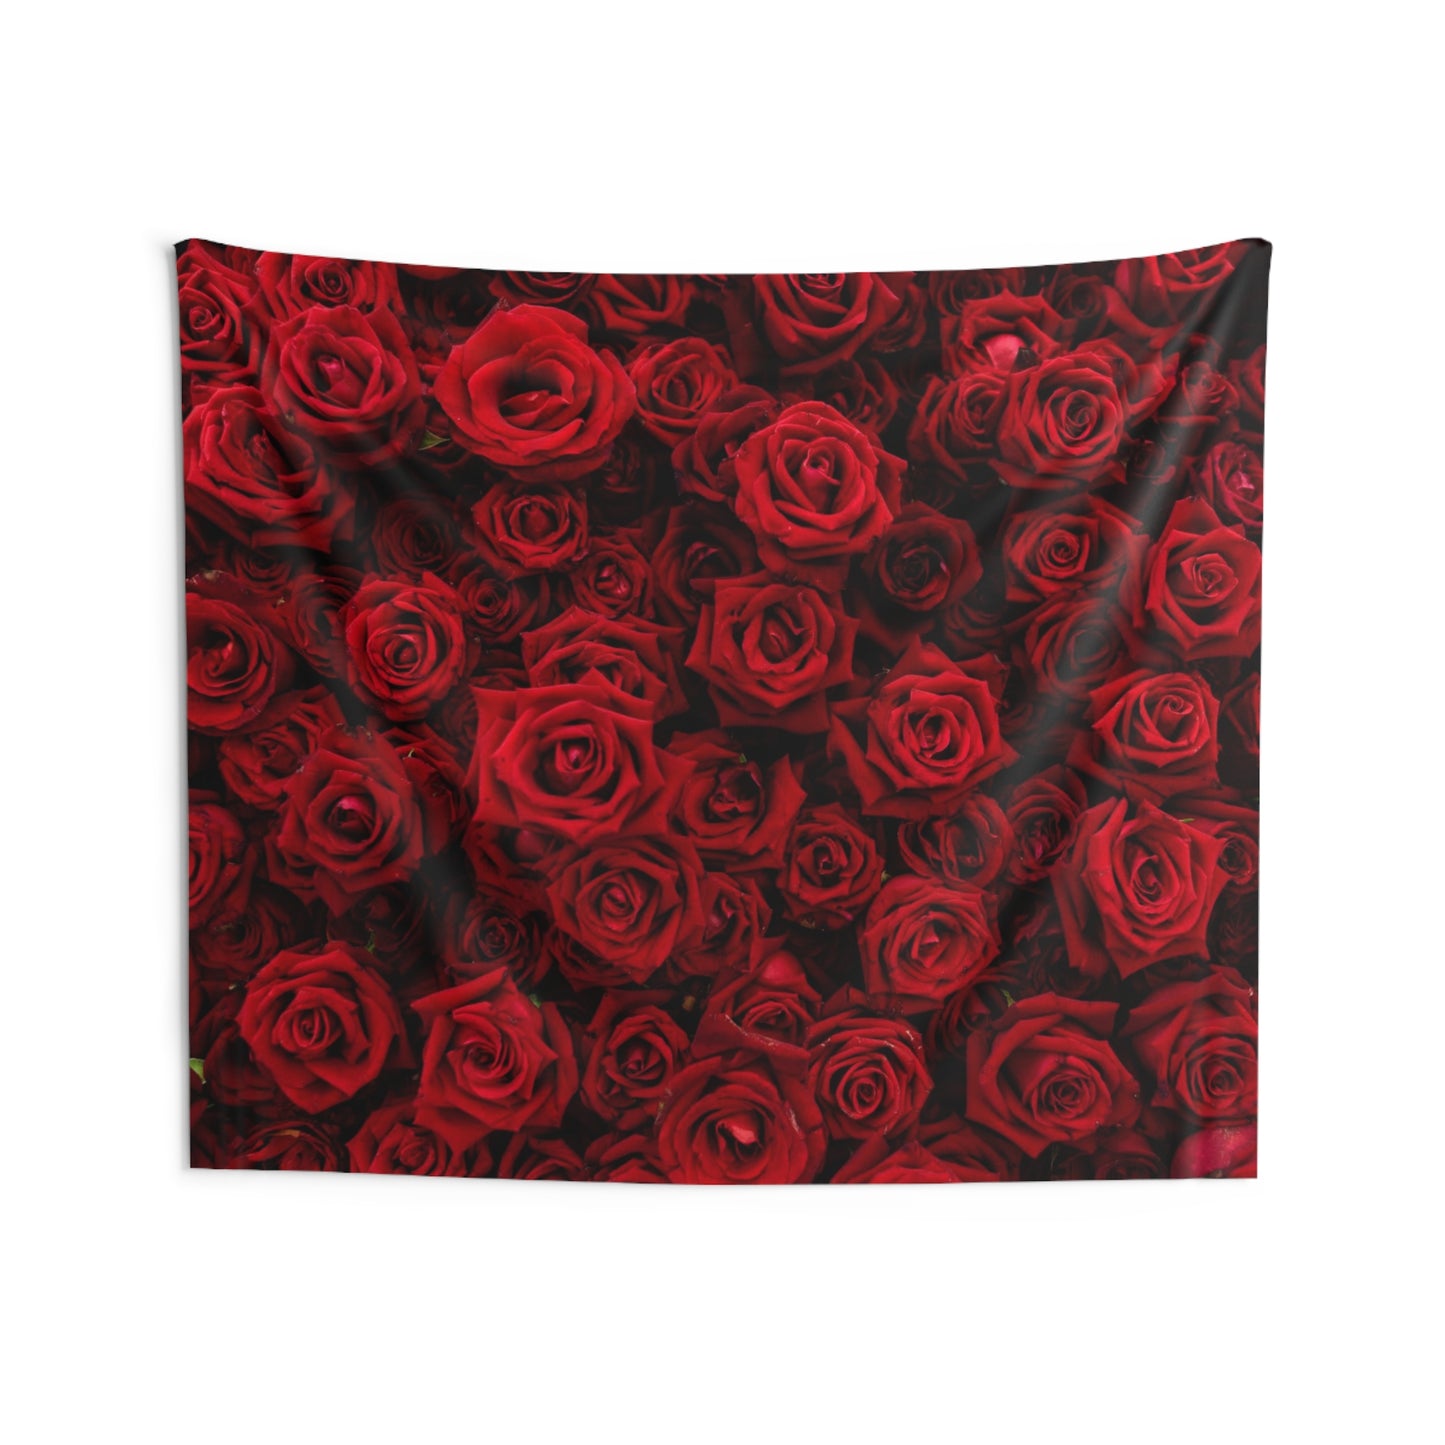 Red Roses Wall Tapestry, Floral Flowers Romantic Bridal Landscape Wall Hanging Large Small Decor Home Dorm Room Aesthetic Backdrop